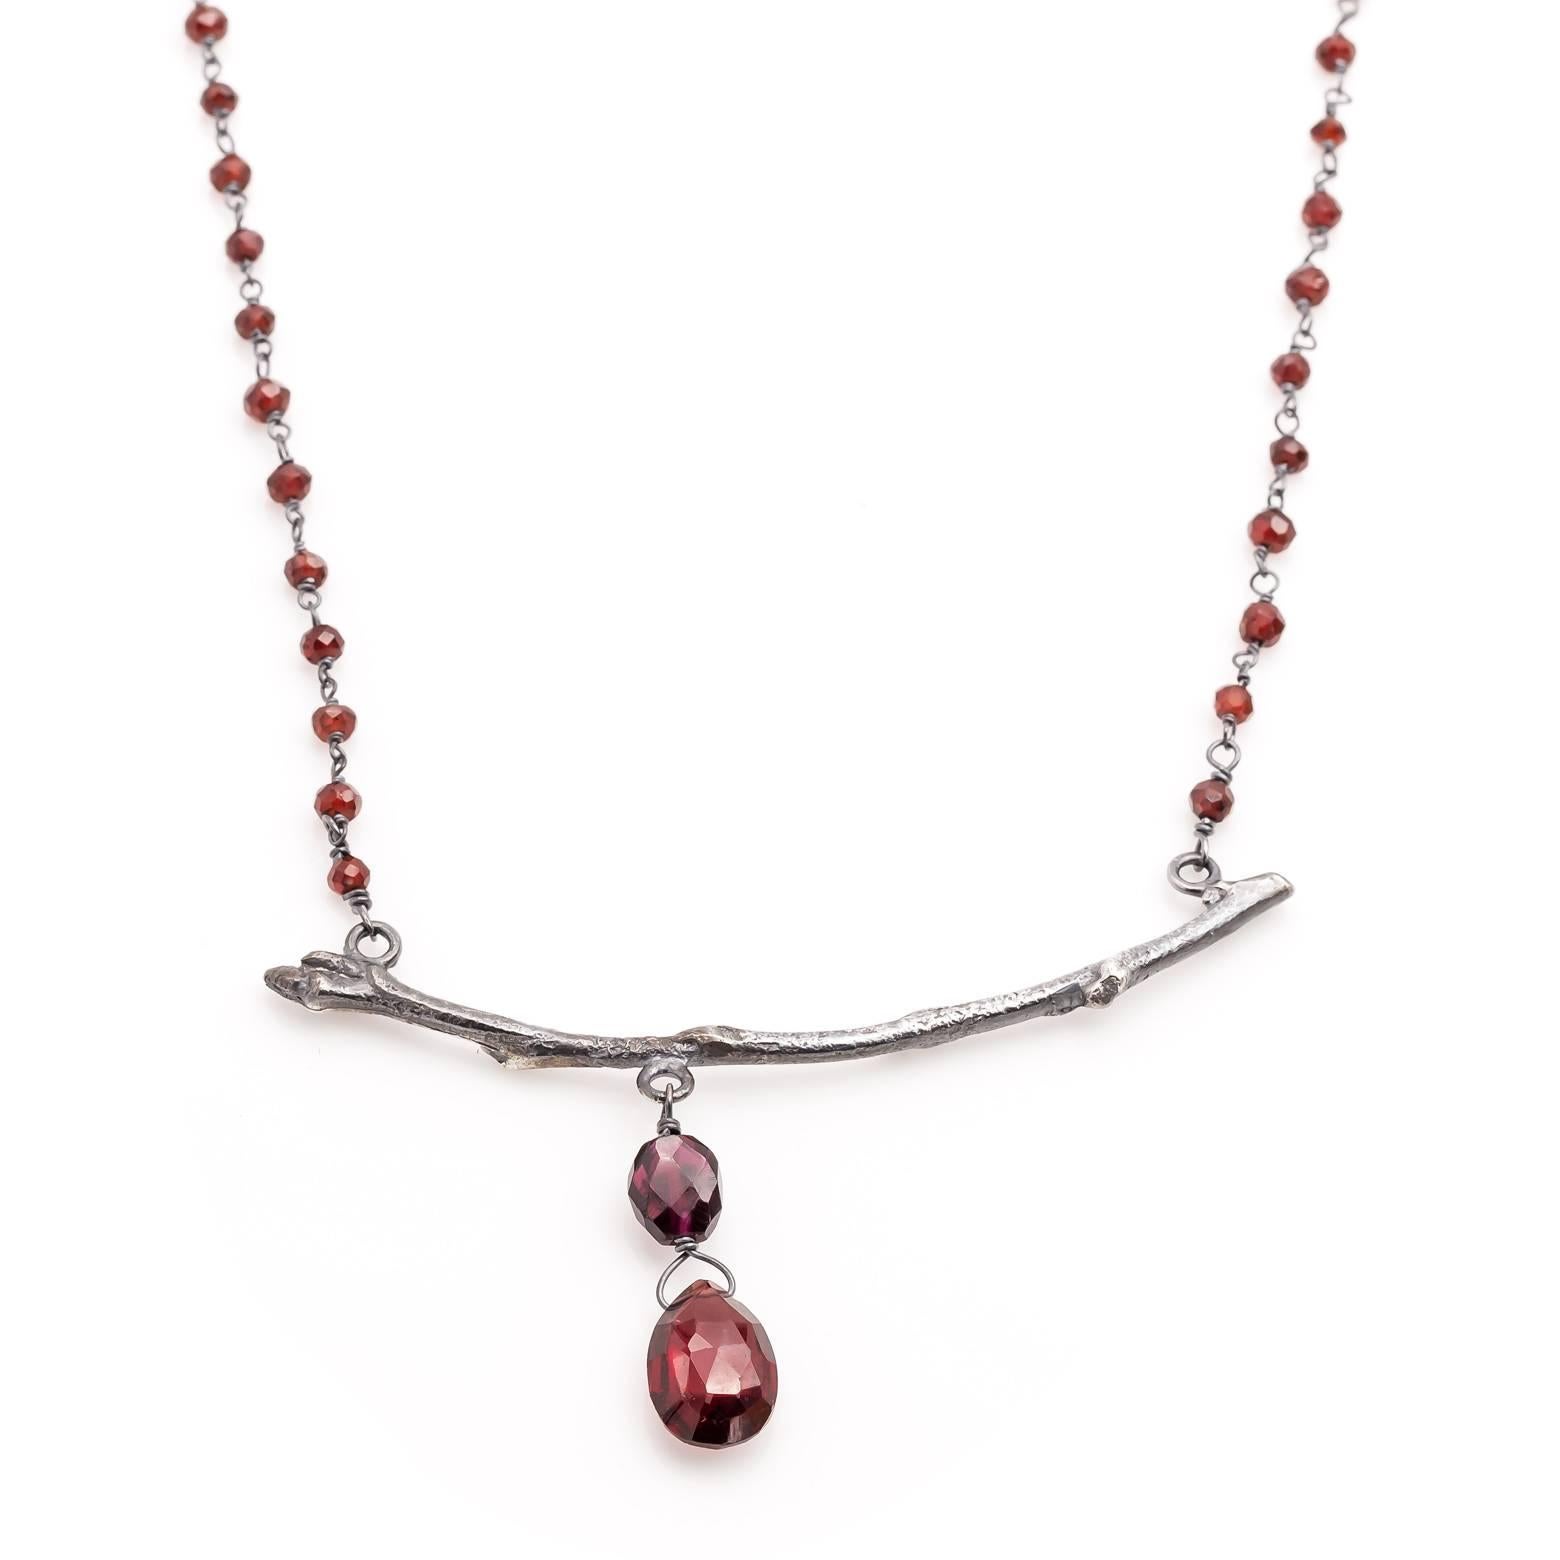 Oxidized sterling silver gives this cast branch a darker elegant look adorned with plentiful garnets. The lower dangling garnets are faceted and the faceted garnet beads along the dark silver chain create a delicacy that is also rich in color. Hand